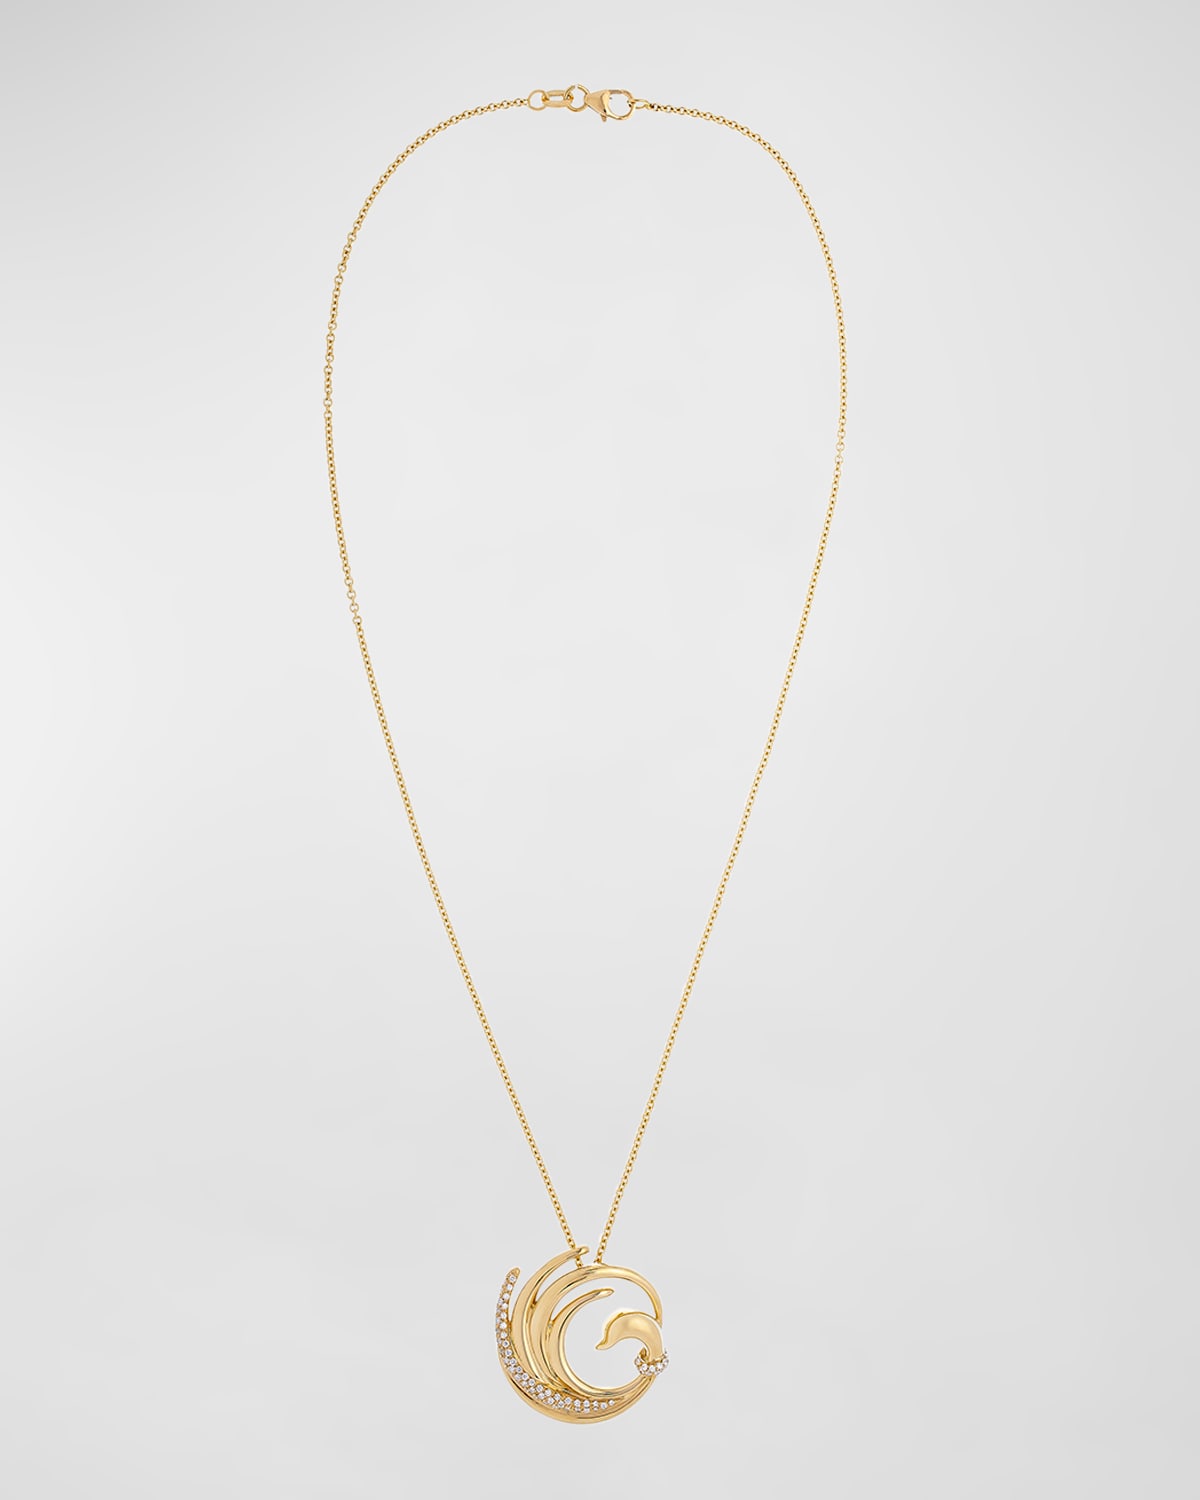 Krisonia 18k Yellow Gold Swan Necklace With Diamonds